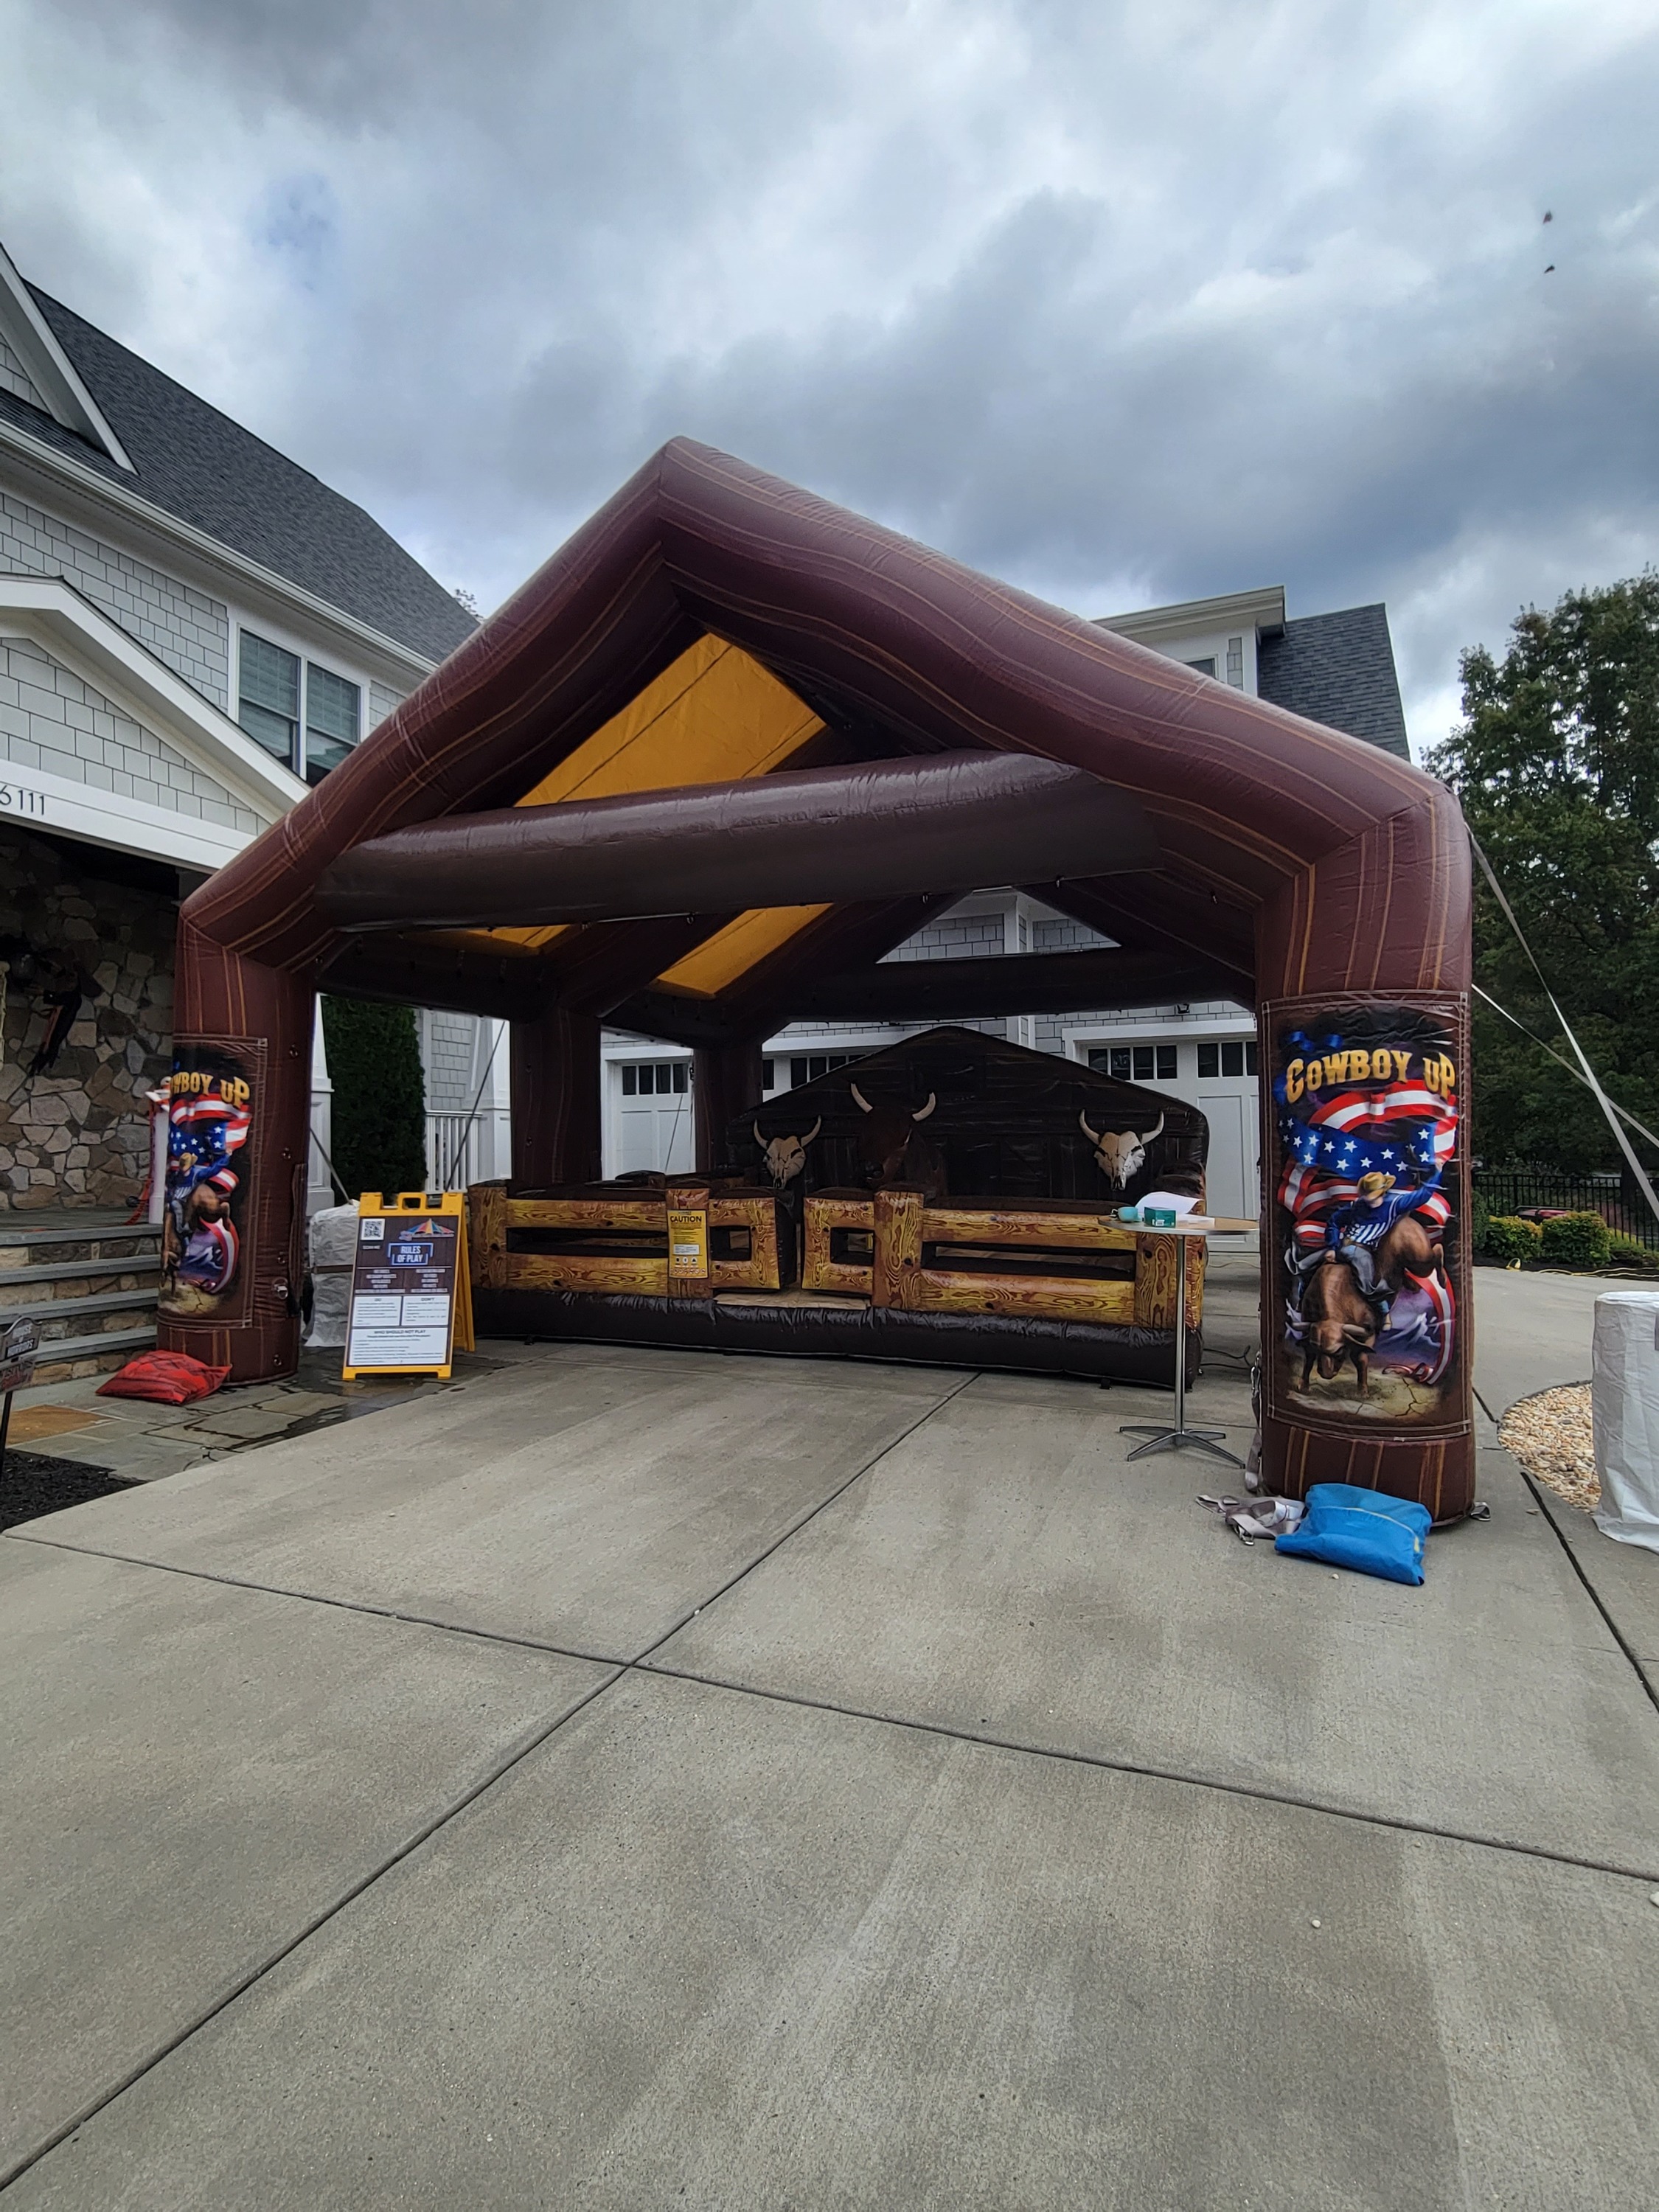 Outdoor setup of a mechanical bull ride by Fiesta Time Amusements in Maryland, enclosed by an inflatable brown canopy with 'COWBOY UP' banners, caution and rules signage, against a backdrop of cloudy skies and residential buildings.